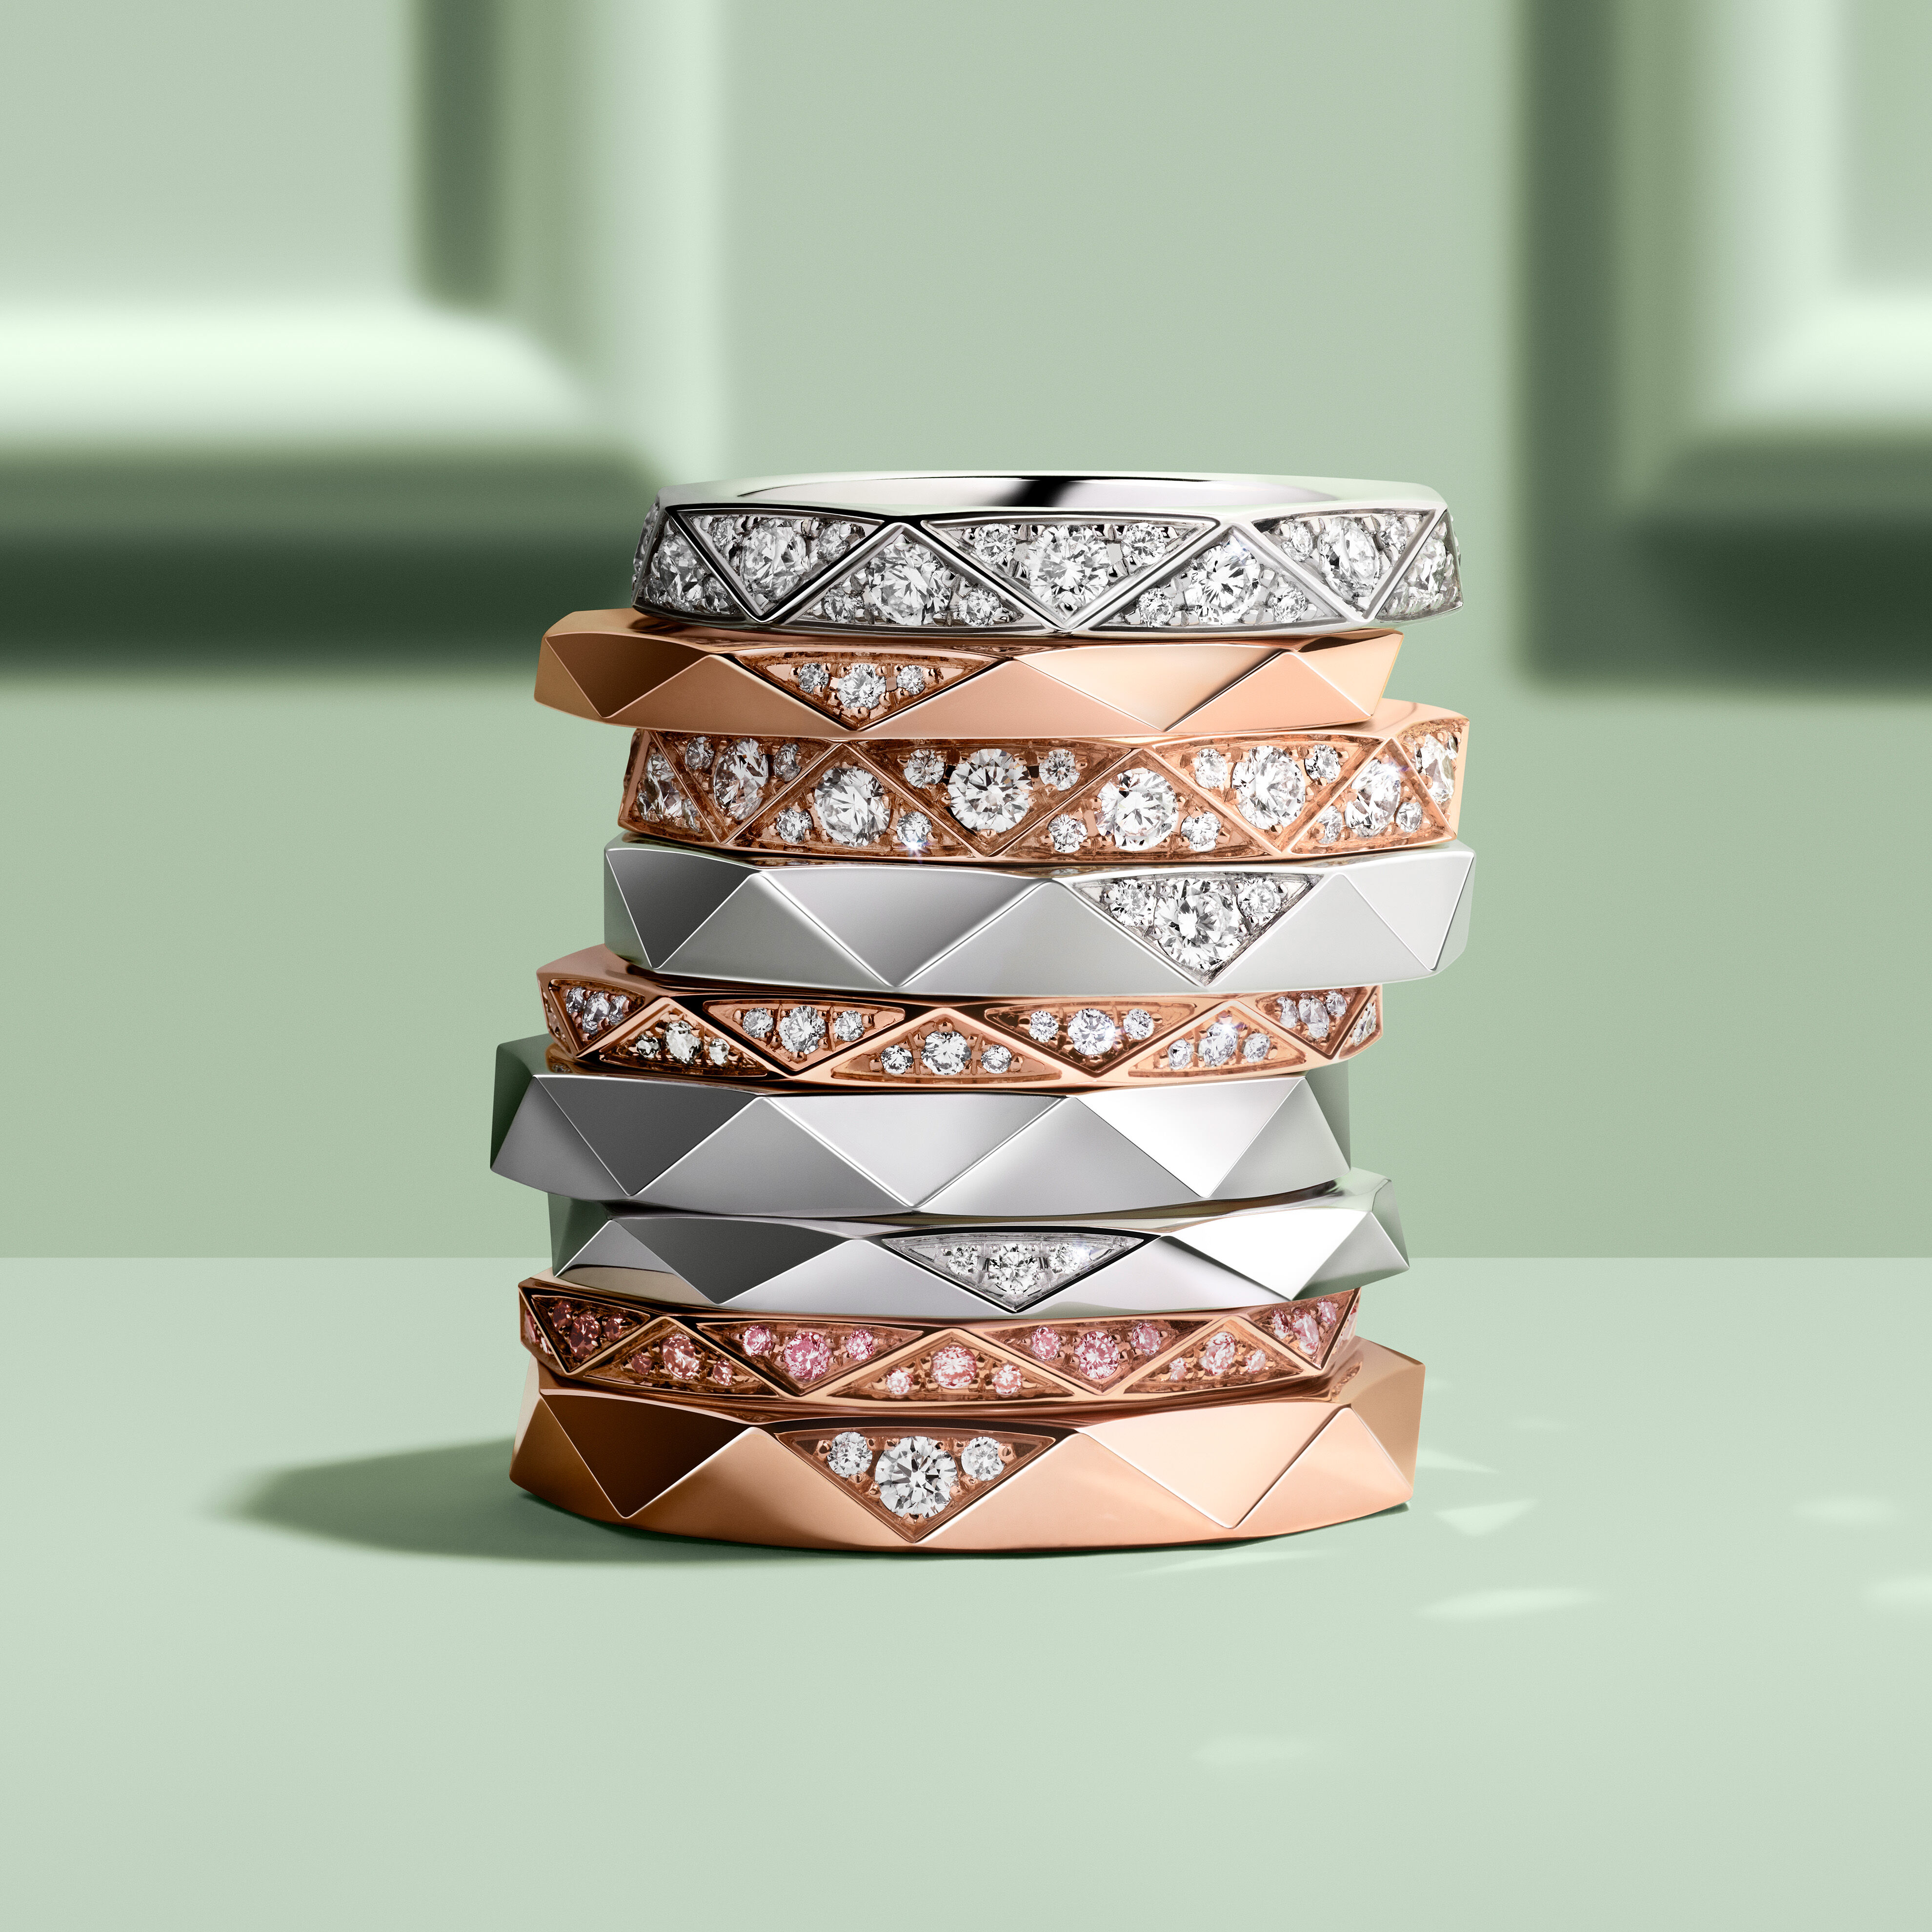 Image of Laurence Graff Signature Rings Stacked